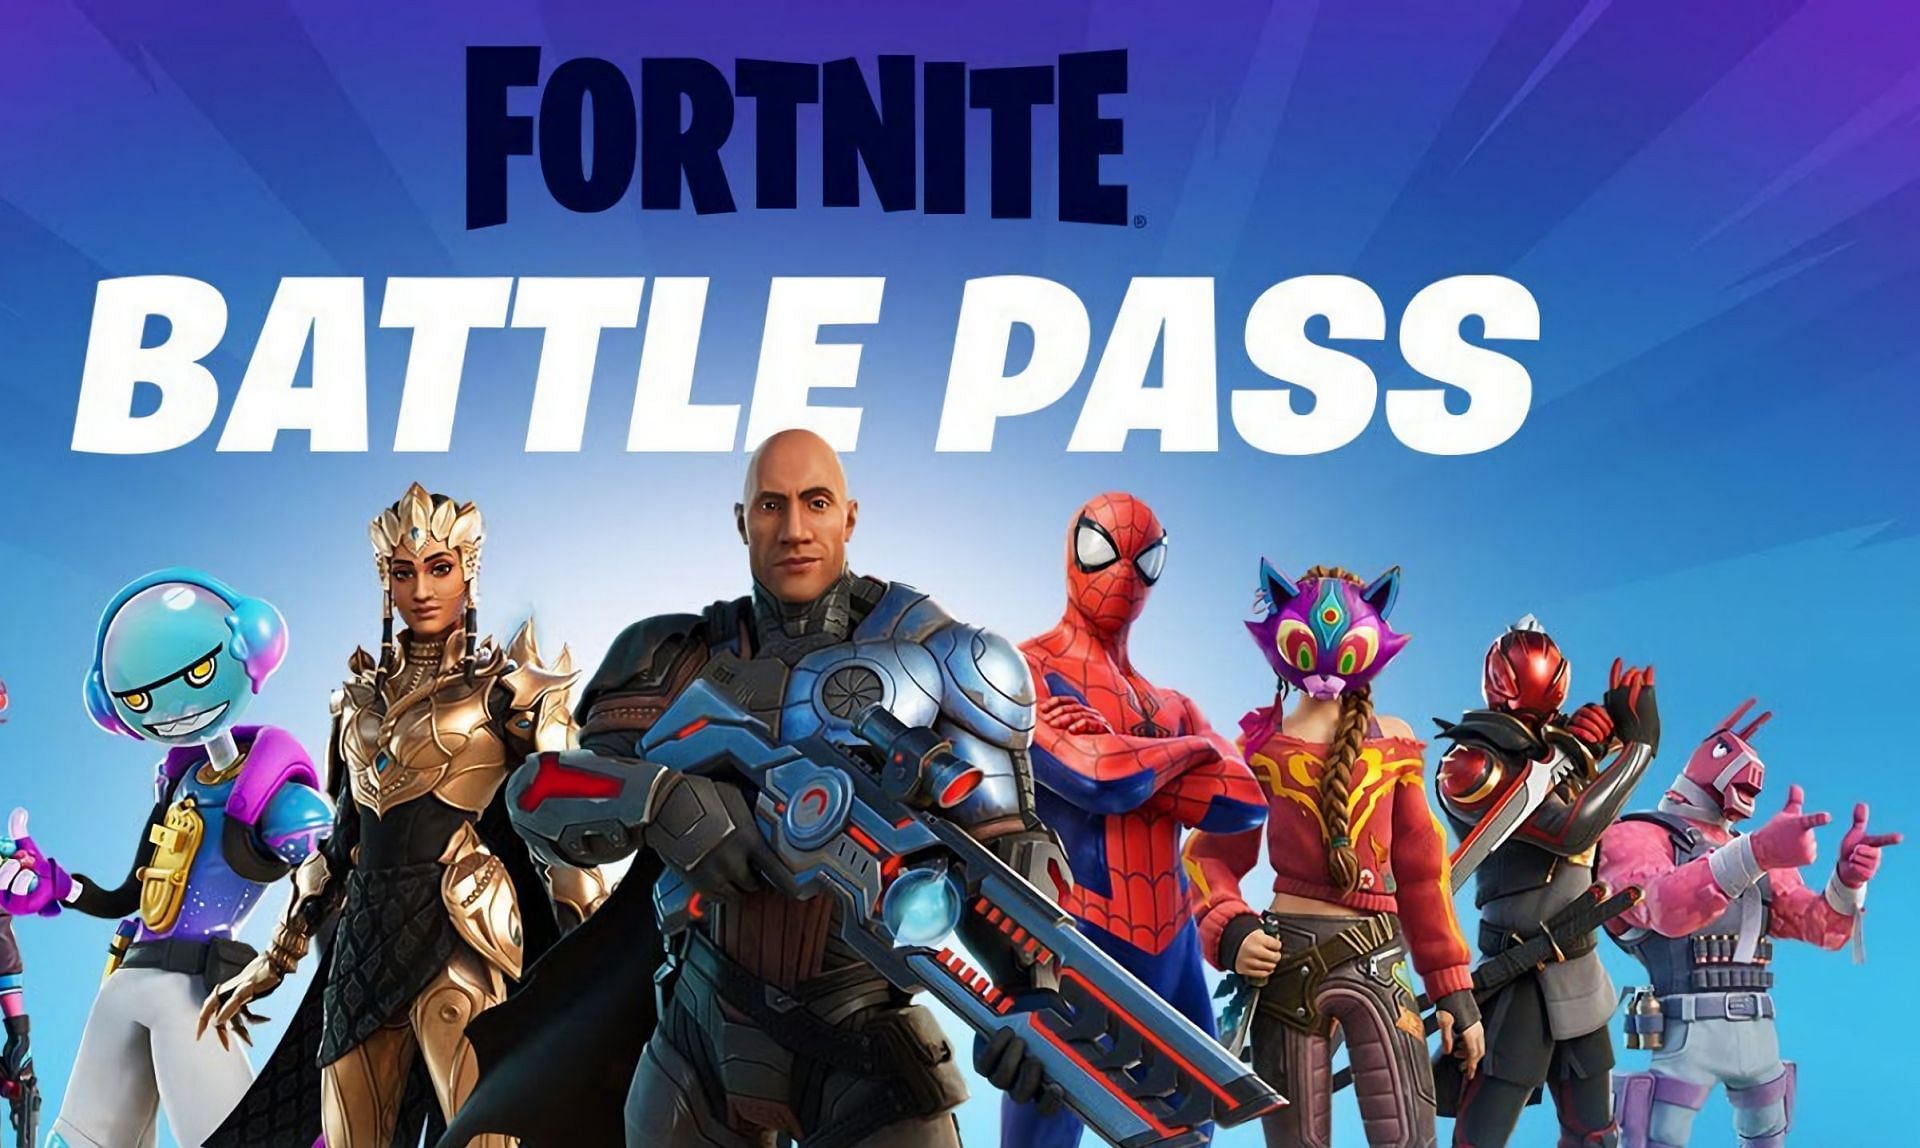 Fortnite Battle Pass song has taken the internet by storm (Image via Epic Games)